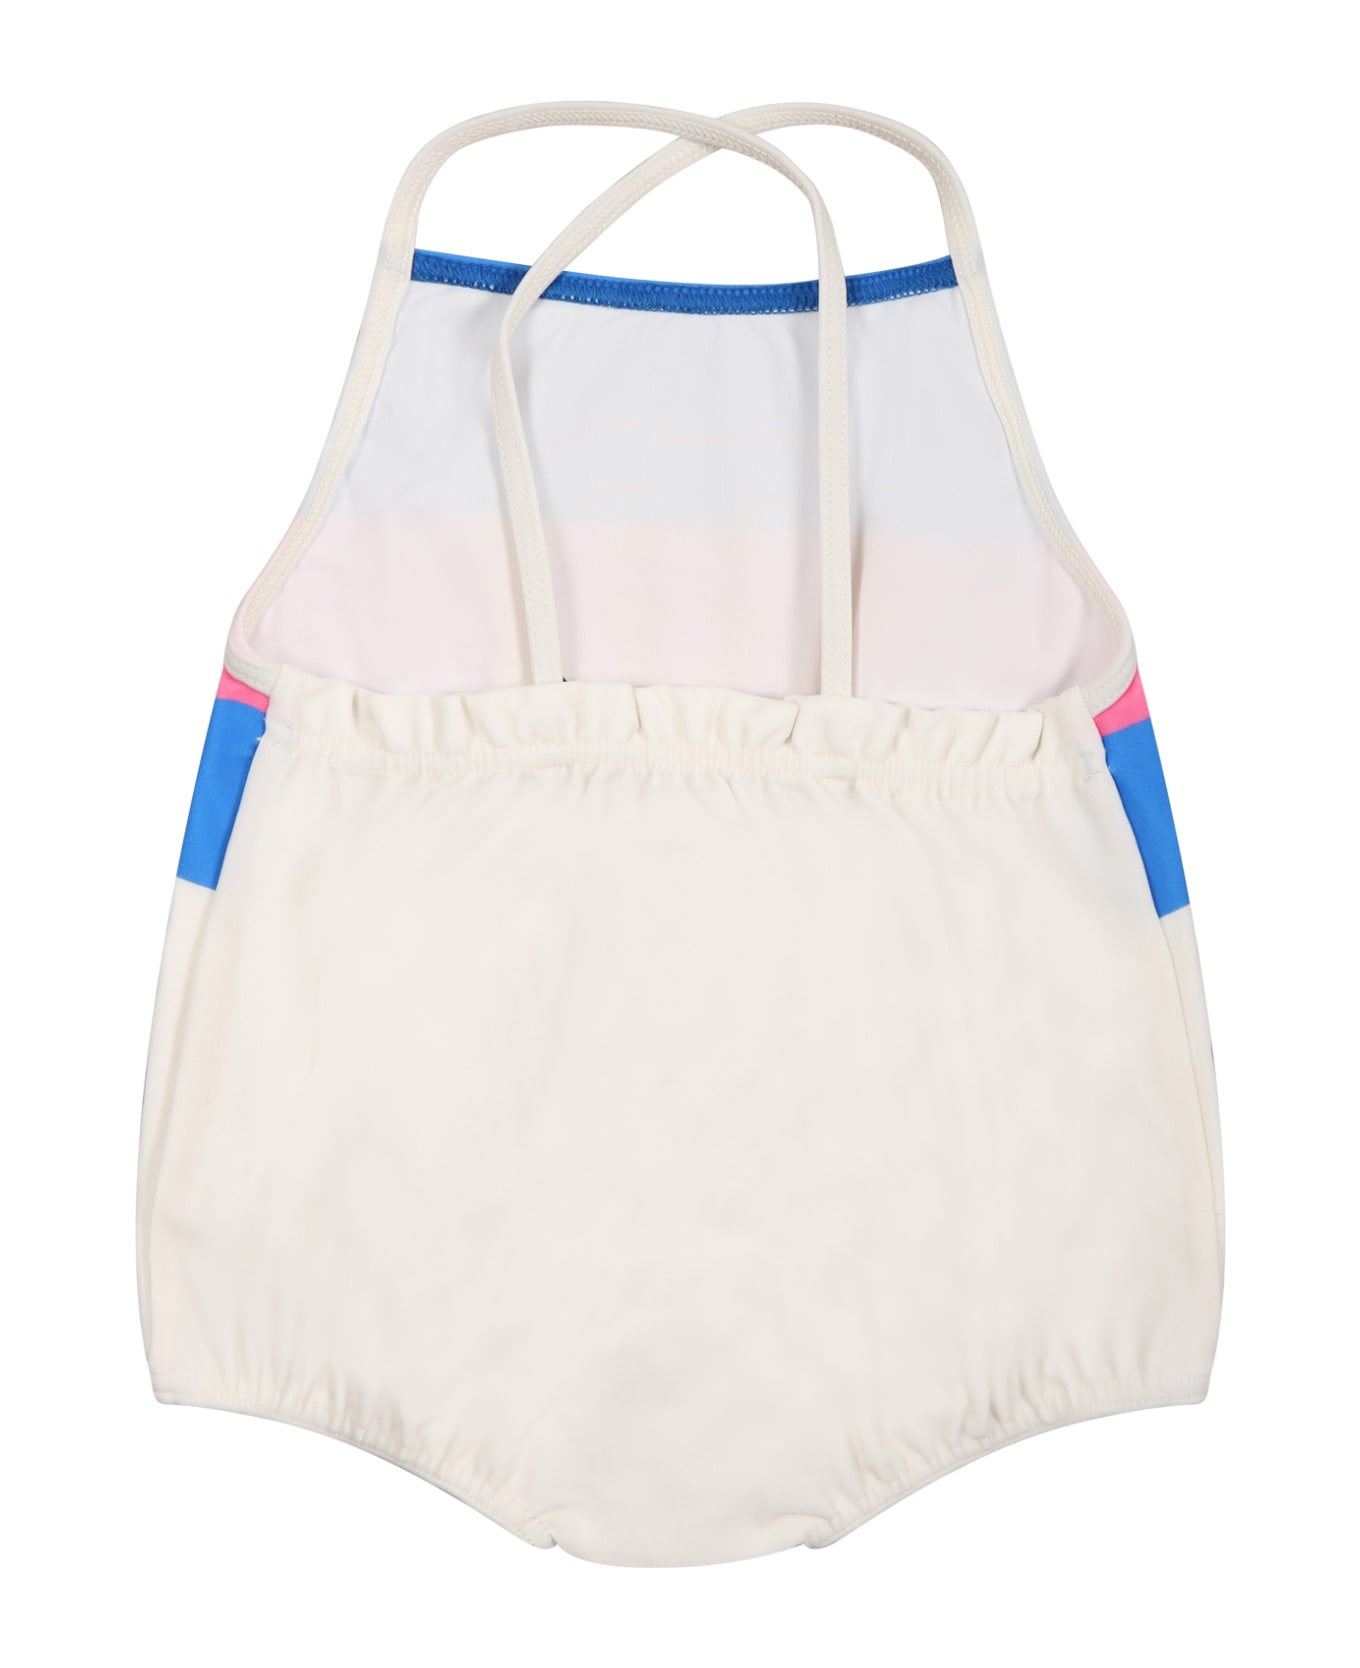 Gucci Ivory Swimssuit For Baby Girl With Vinatge Print And Iconic Double Gg - Multicolor 水着